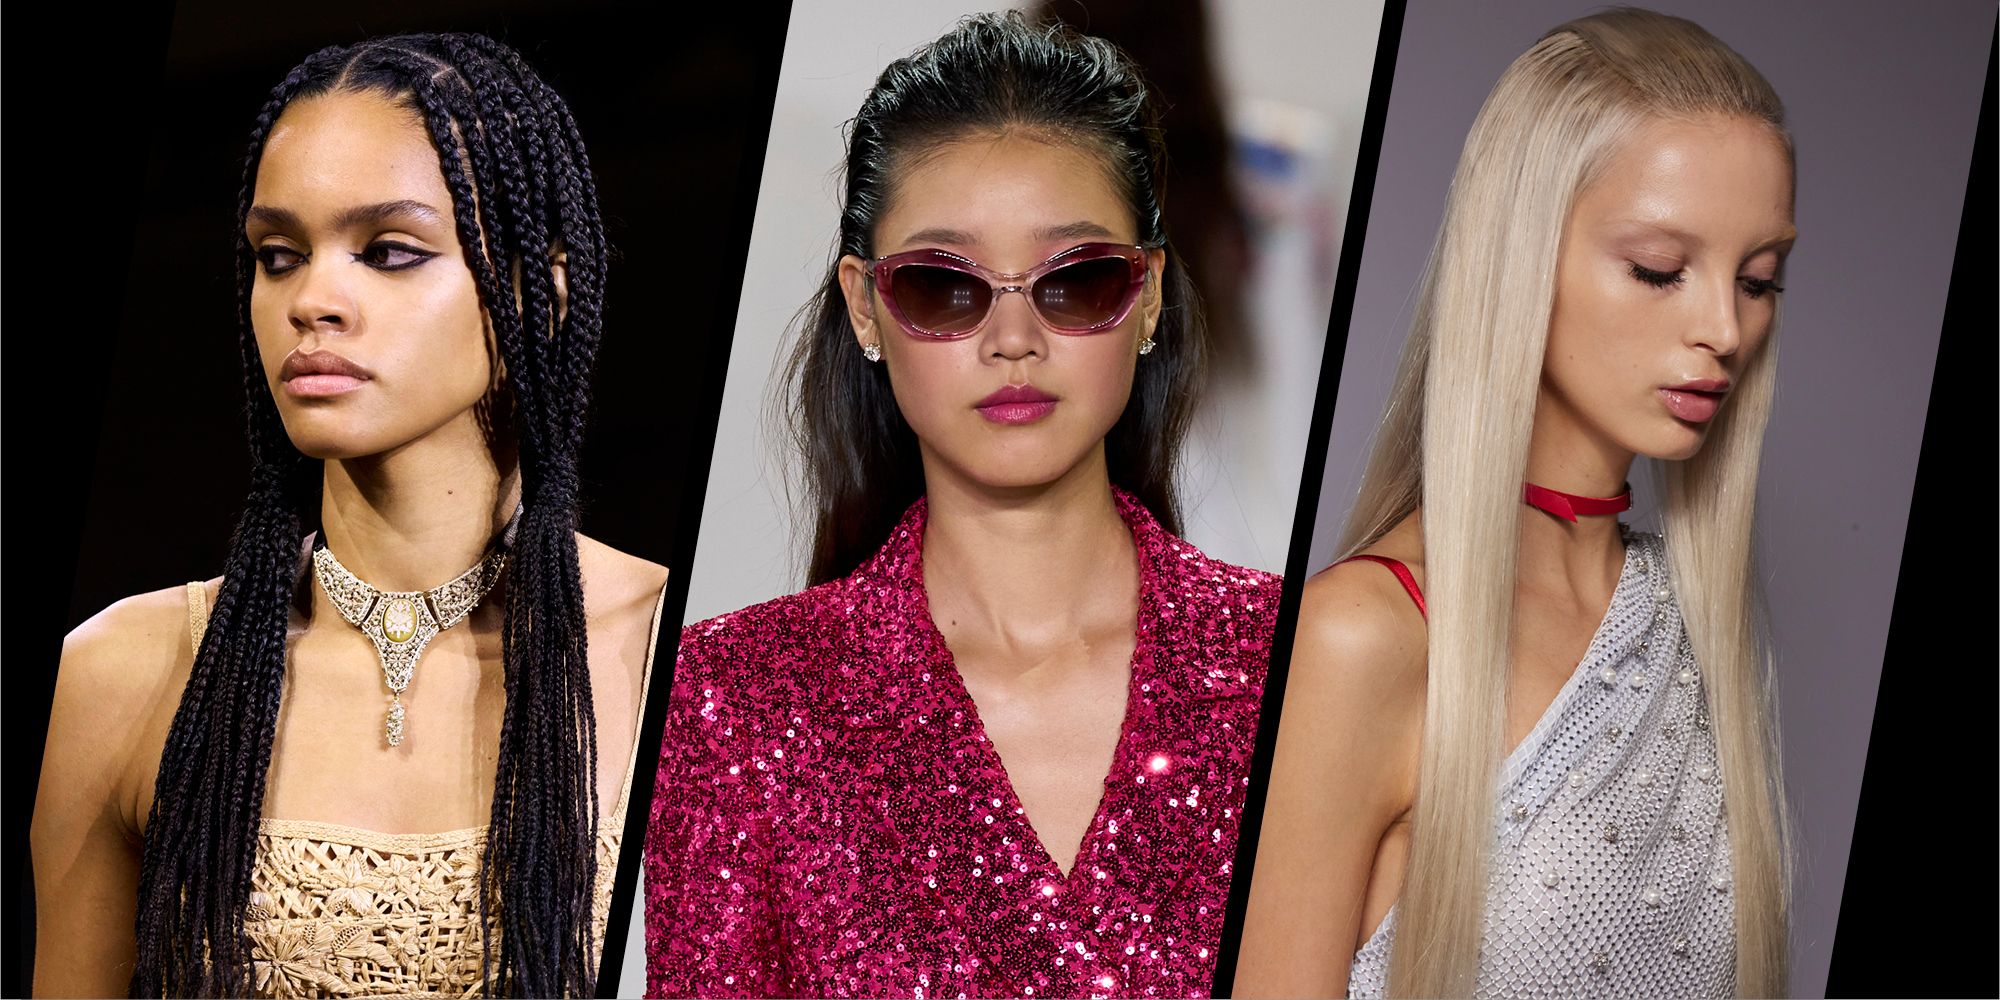 The key hair trends from the spring/summer 2023 fashion weeks